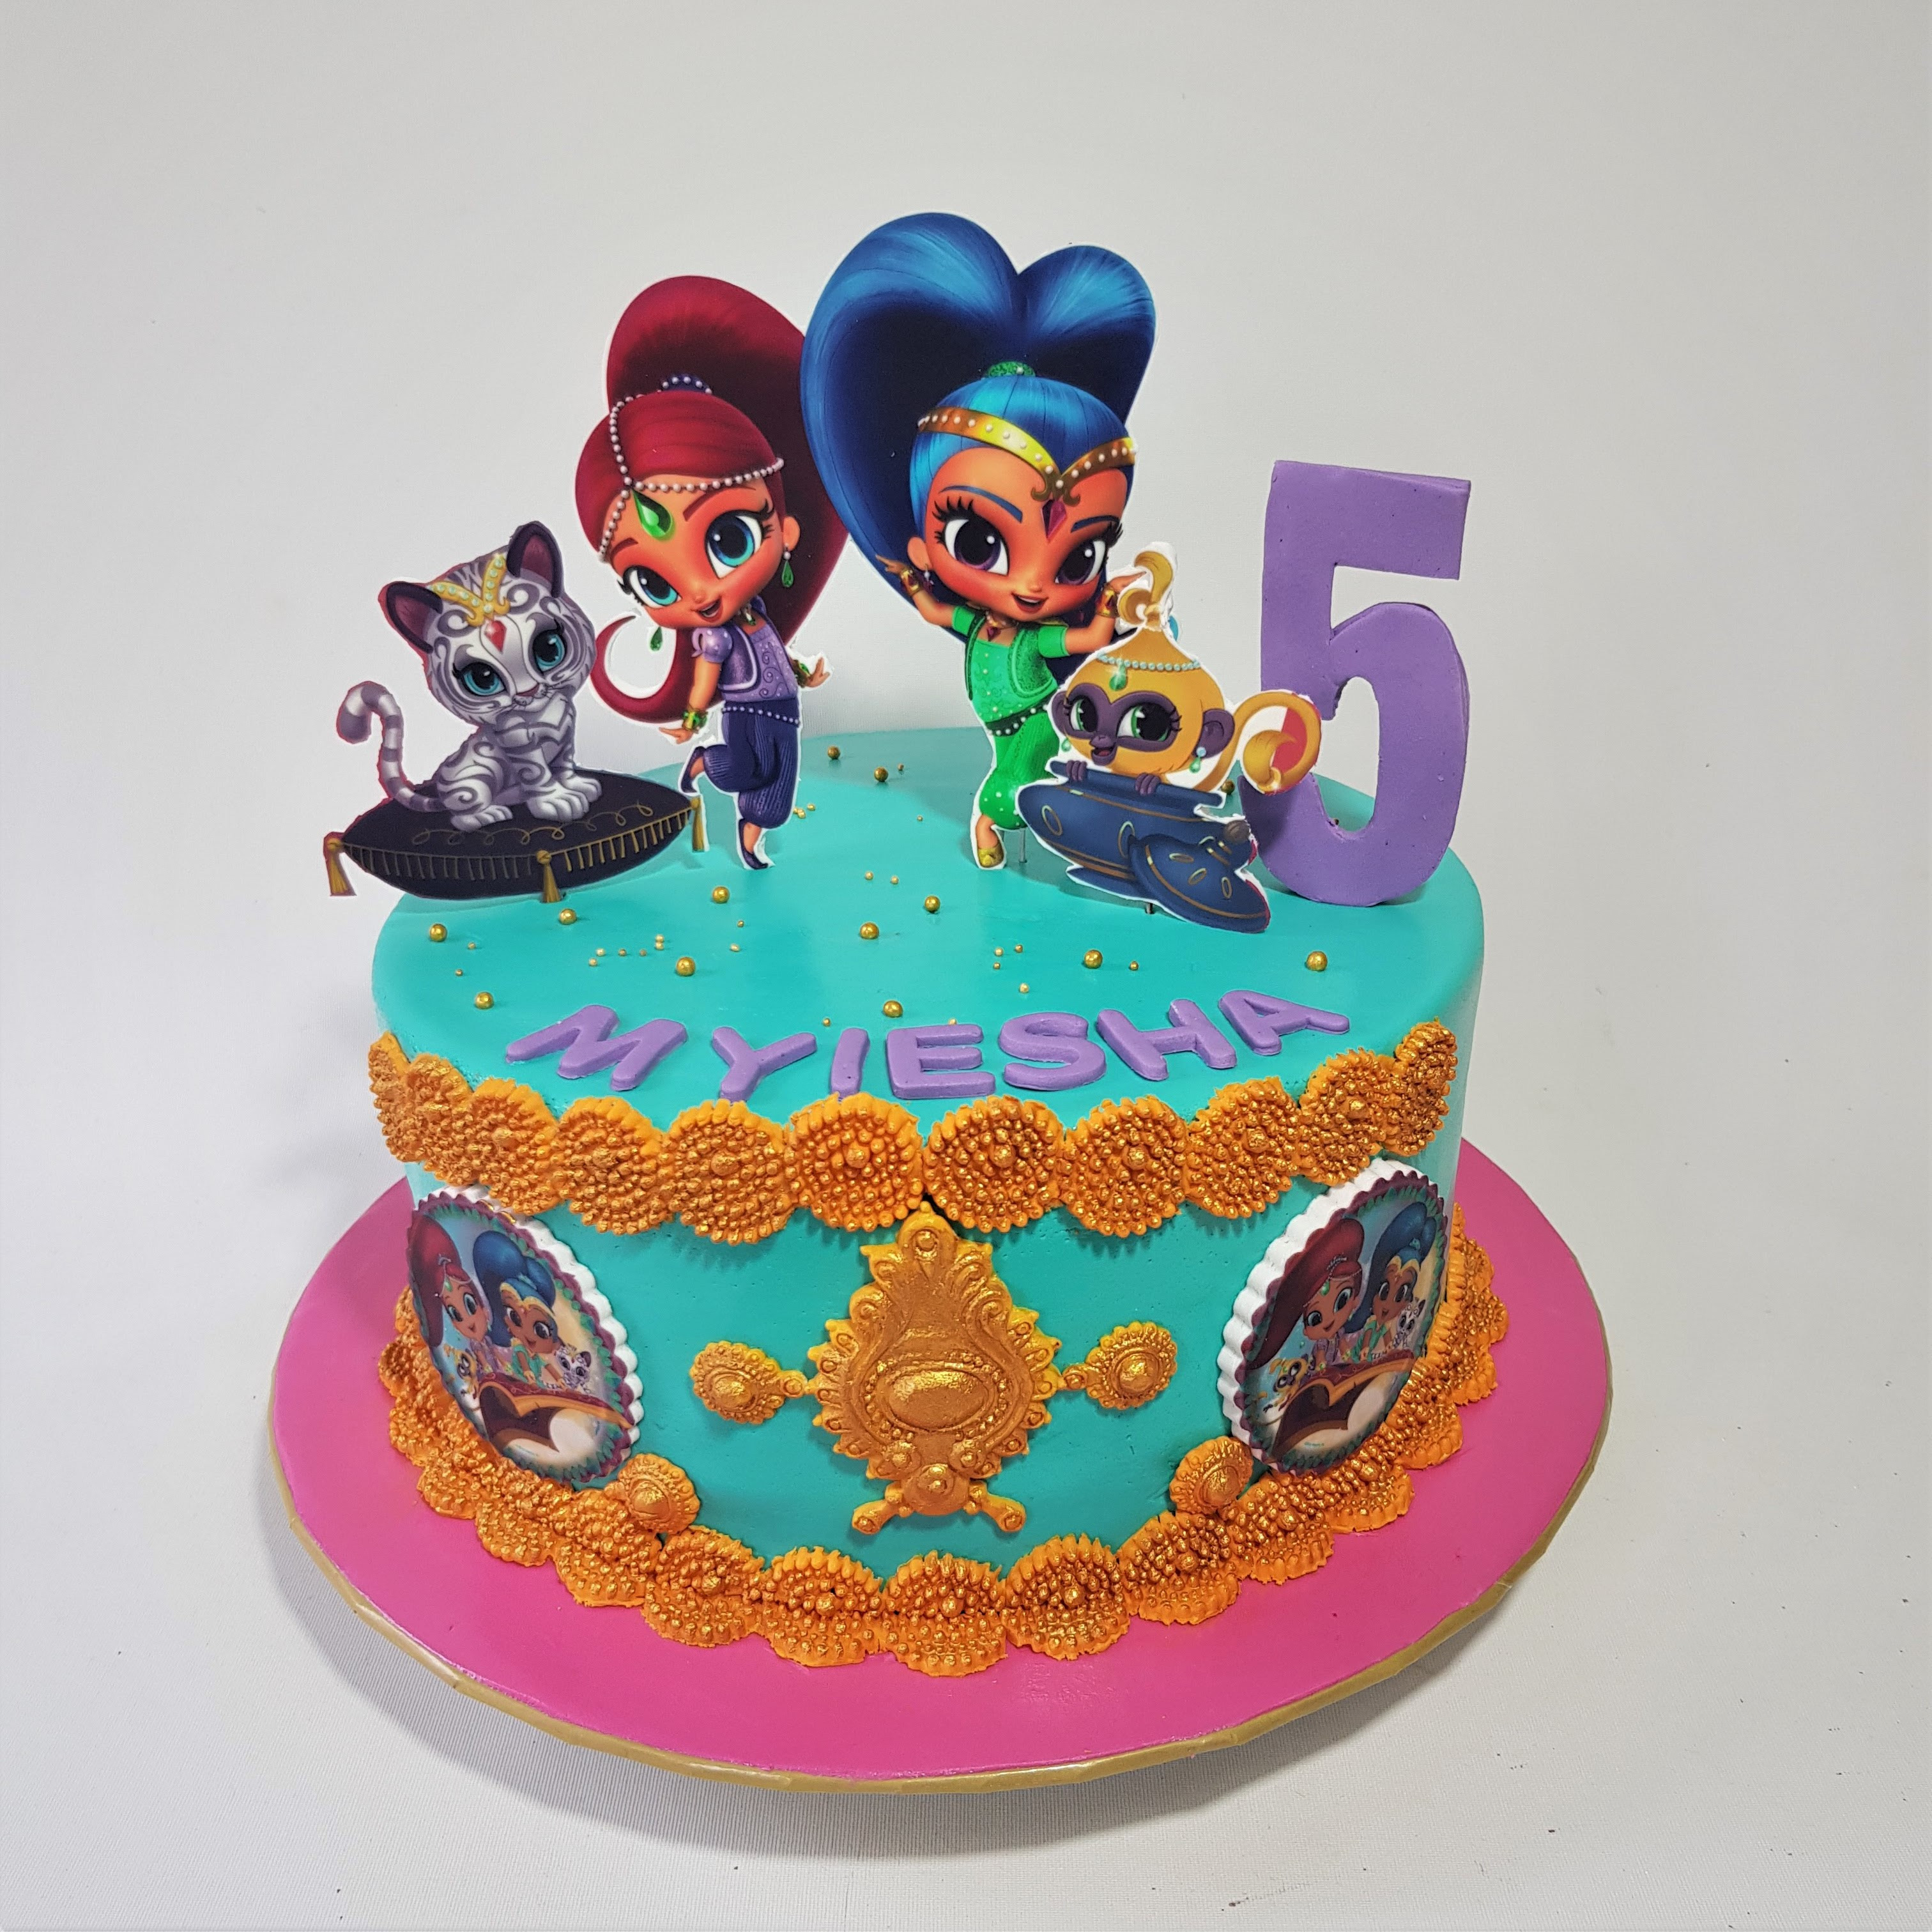 Shimmer And Shine Birthday Cake
 SHIMMER AND SHINE CAKE Sooperlicious Cakes